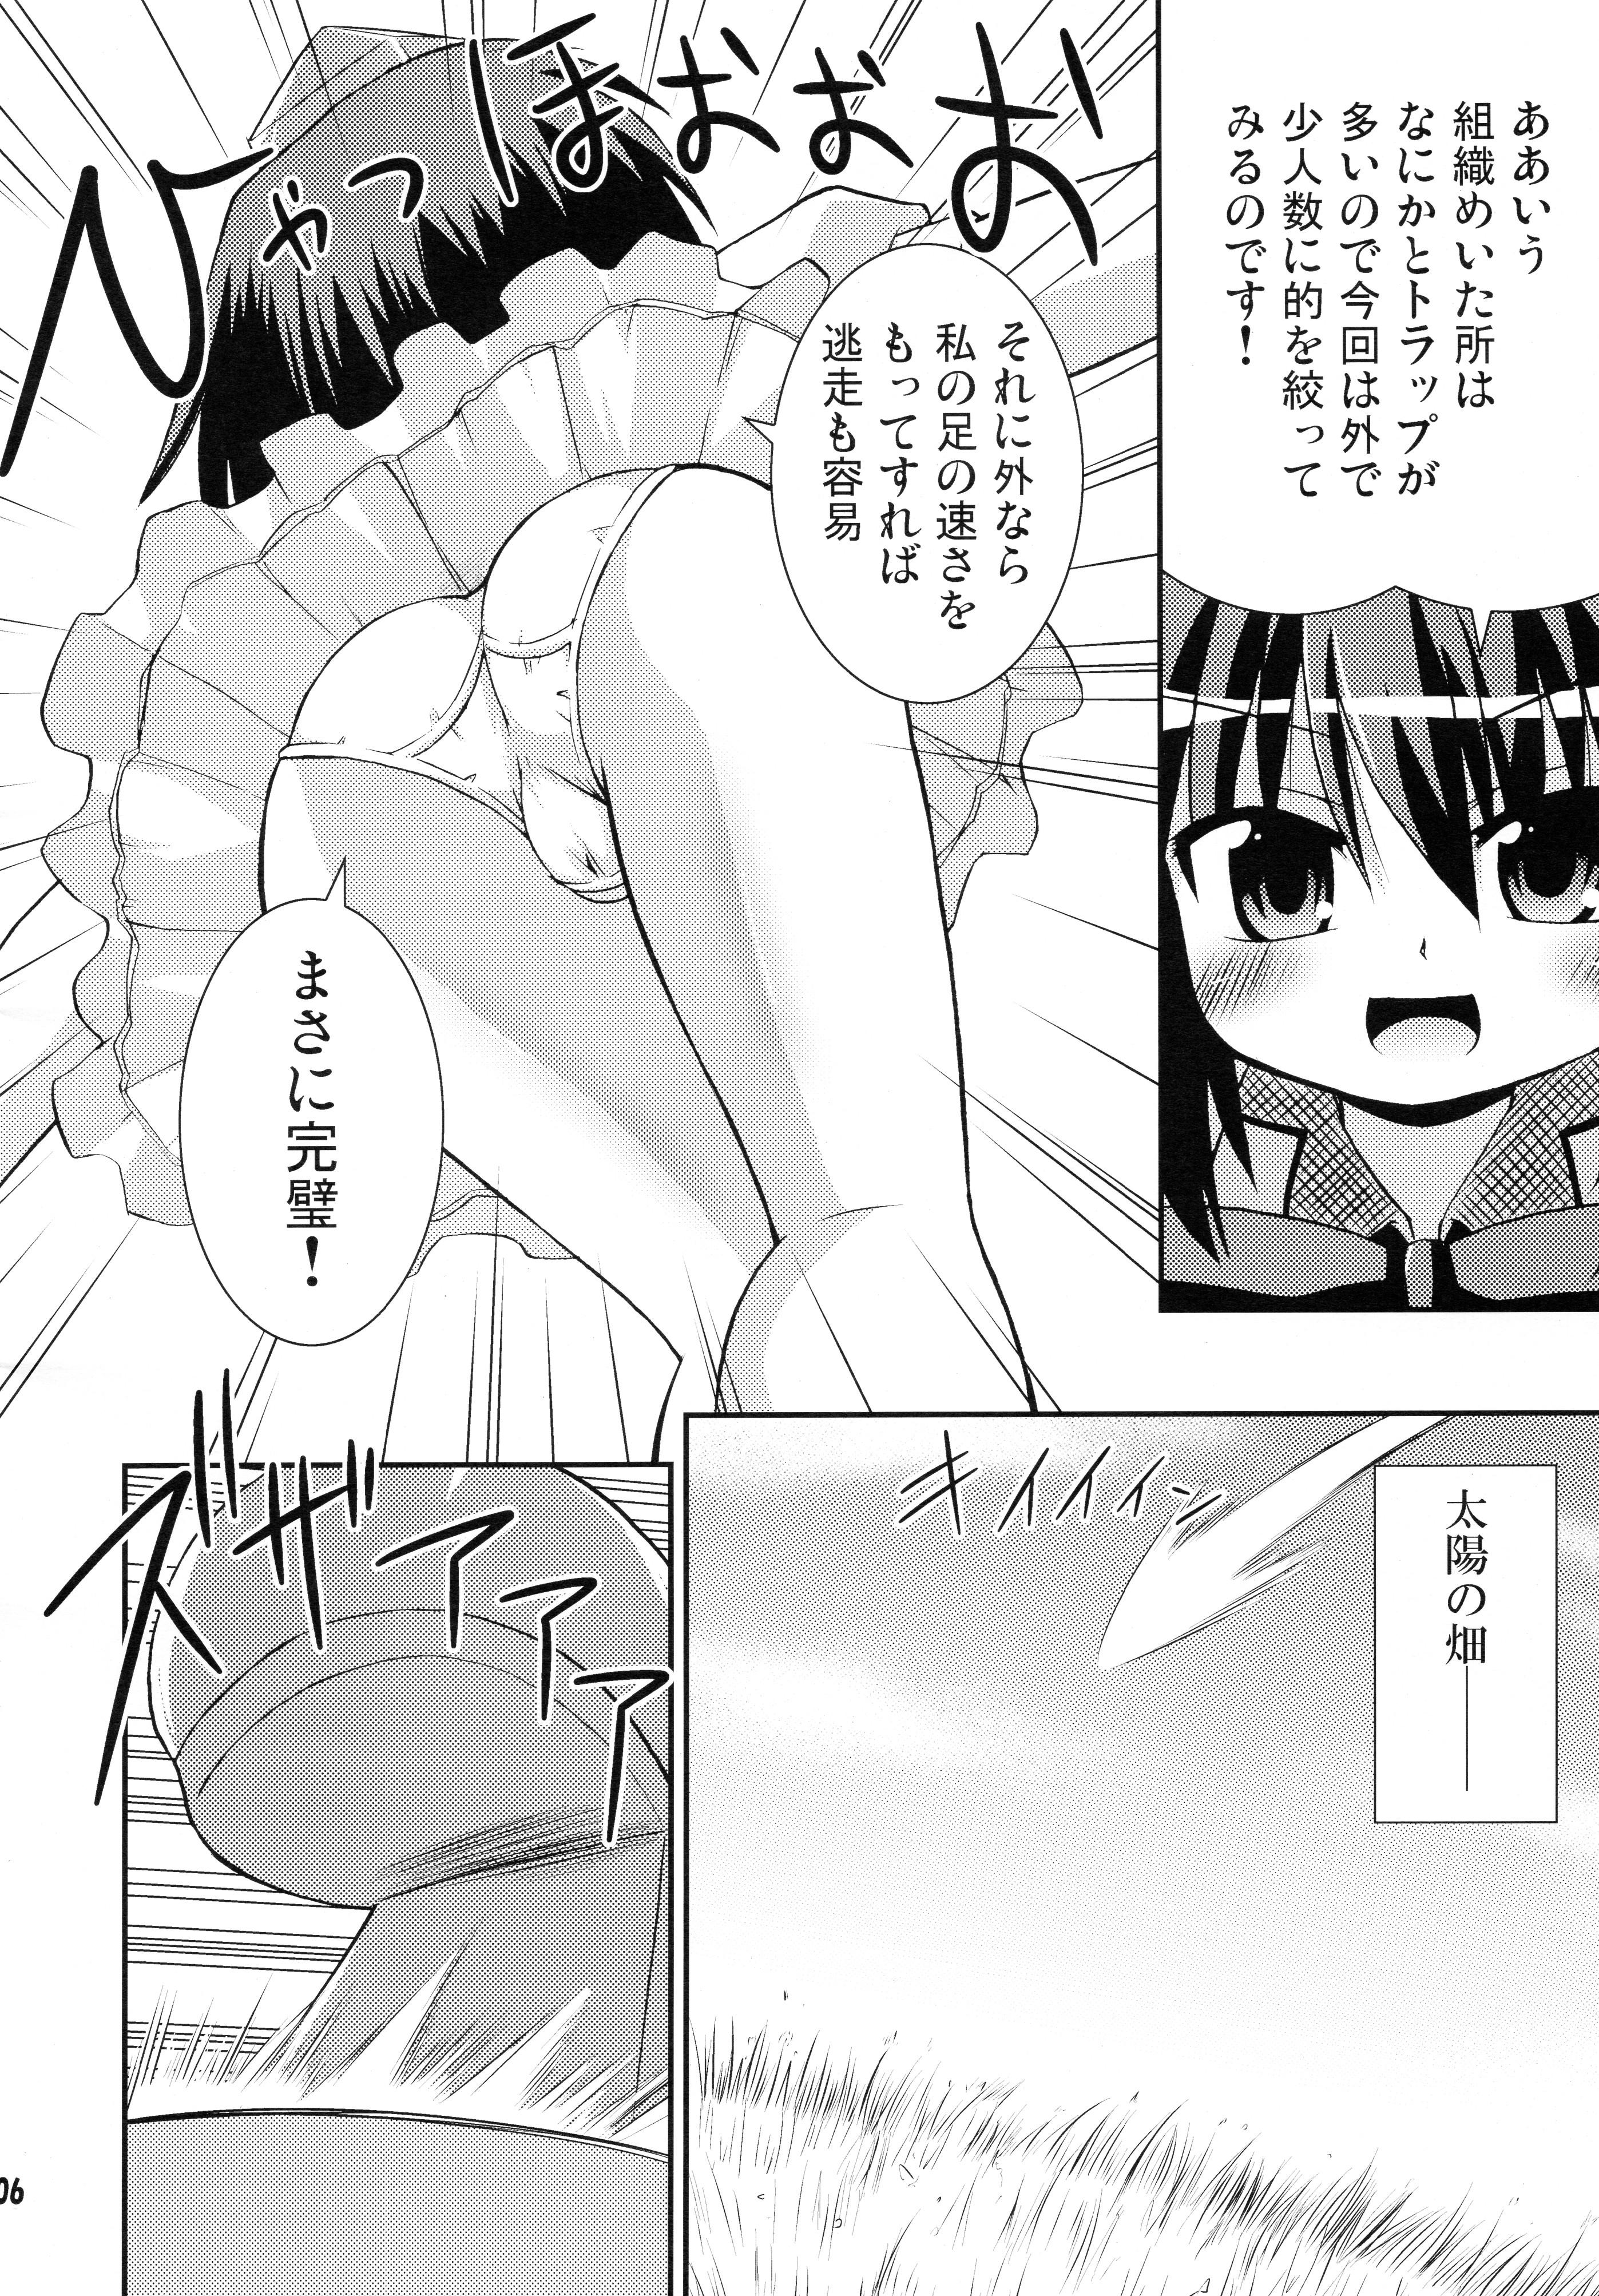 Longhair Shameima! - Touhou project Con - Page 6